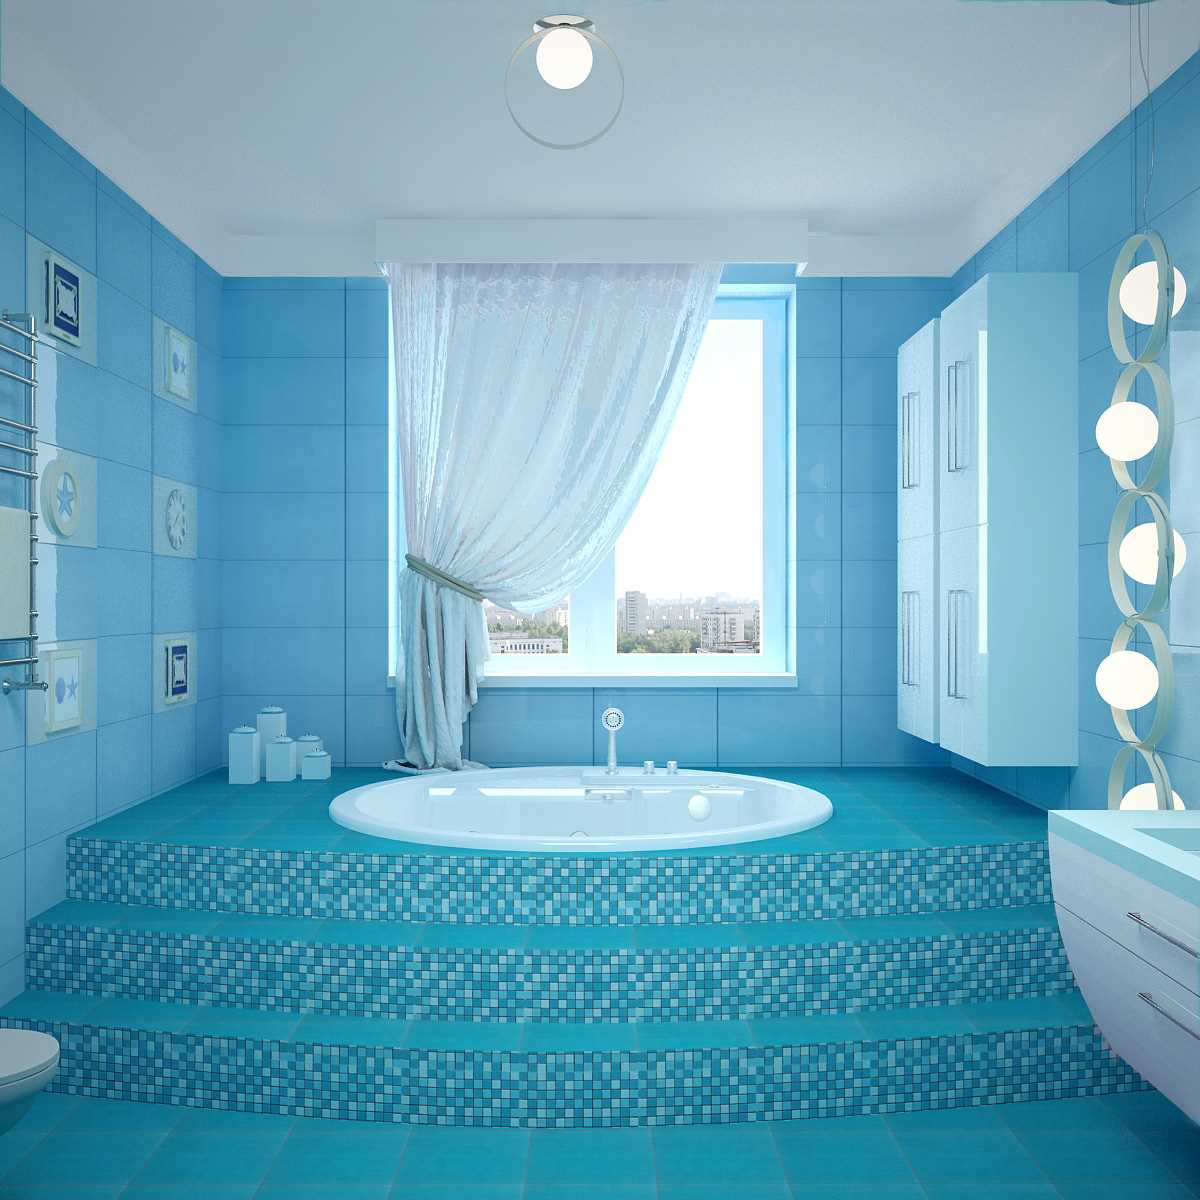 variant of the unusual interior of the bathroom